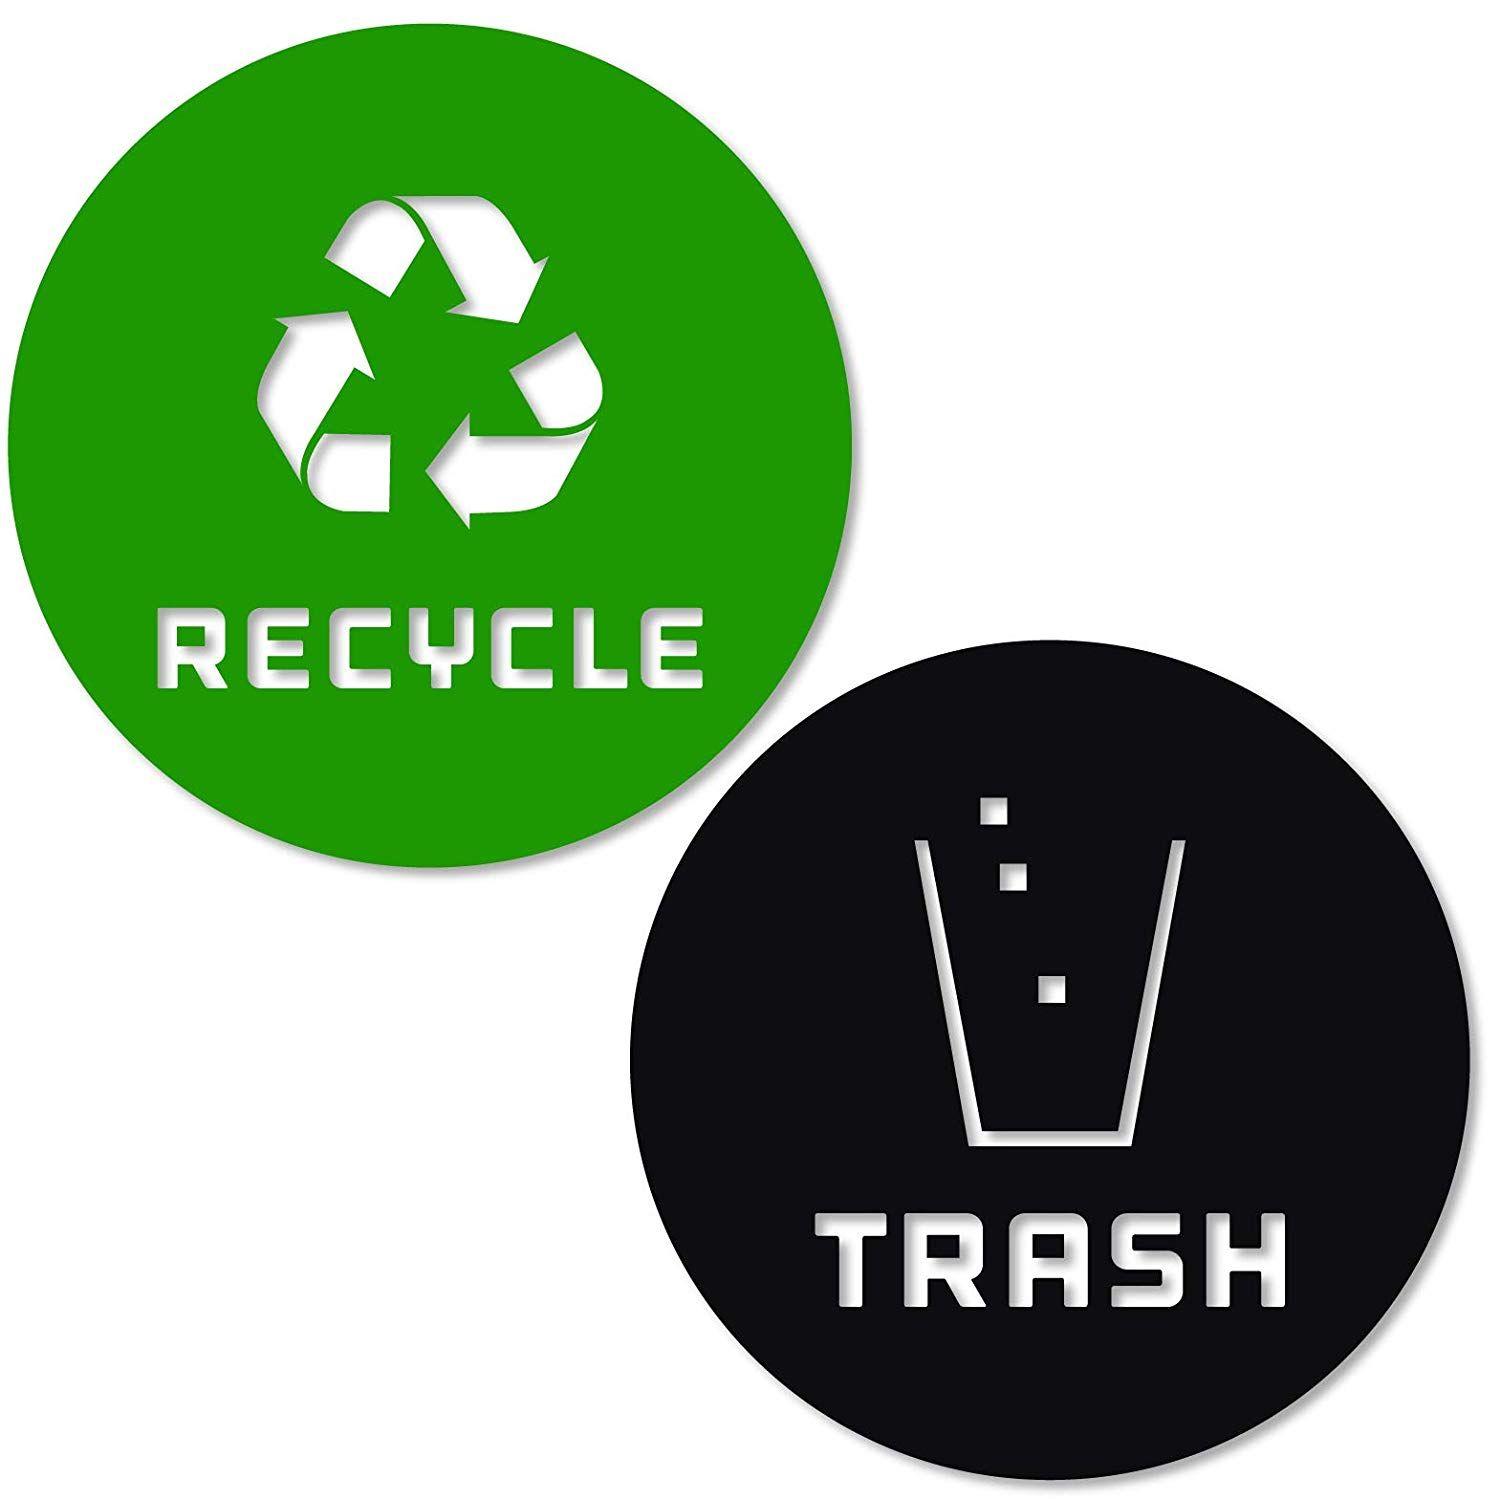 Recycle Cans Logo - Recycle and Trash Sticker Vinyl Modern Logo 2.75 x 2.75 1 ea